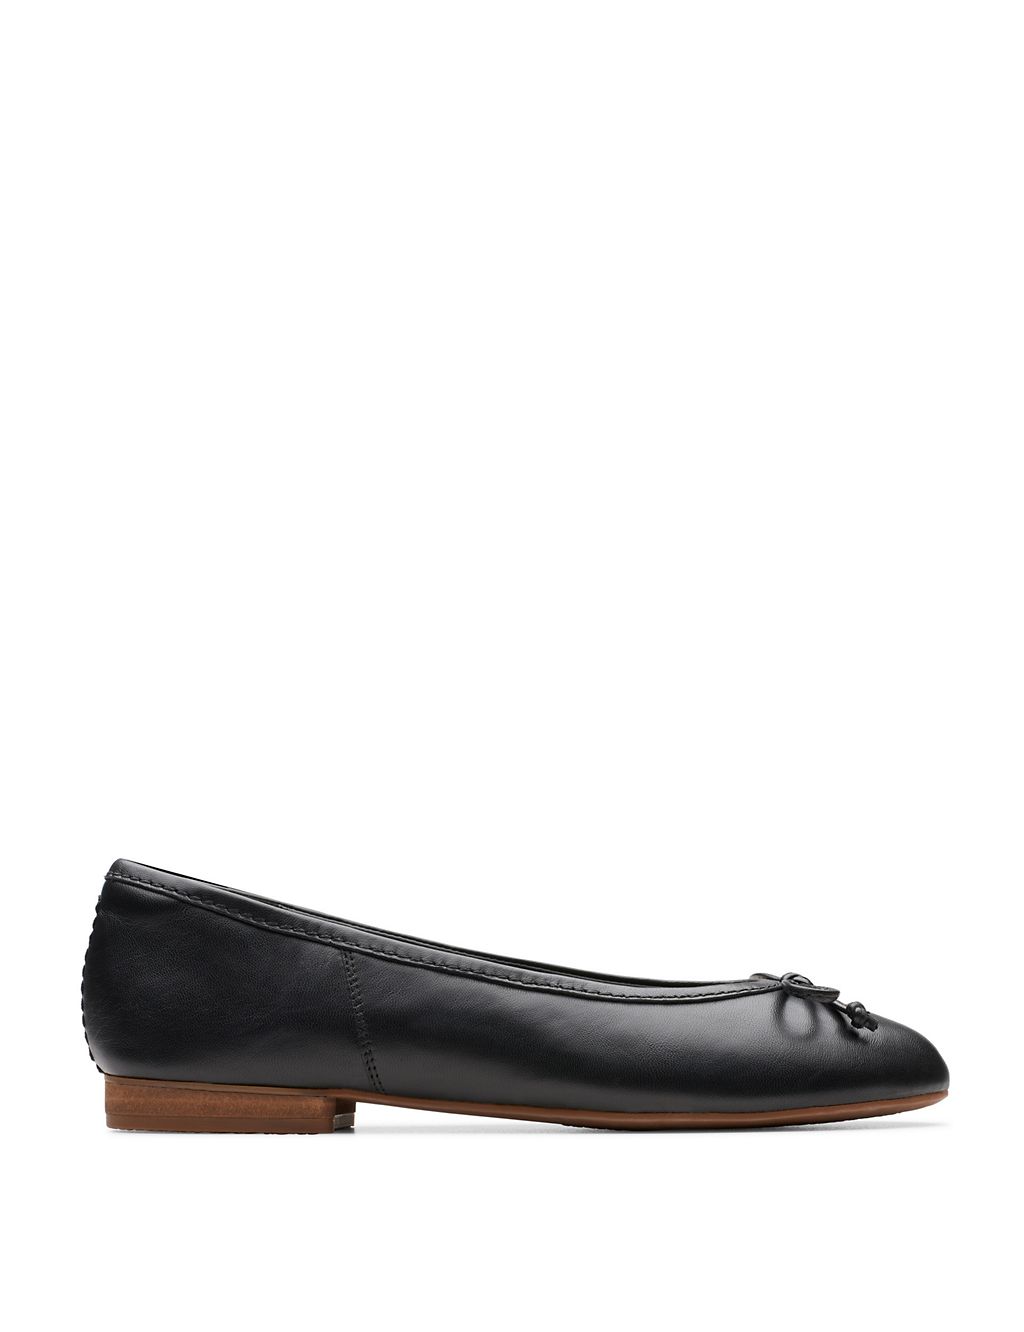 Wide Fit Leather Slip On Flat Pumps 3 of 6